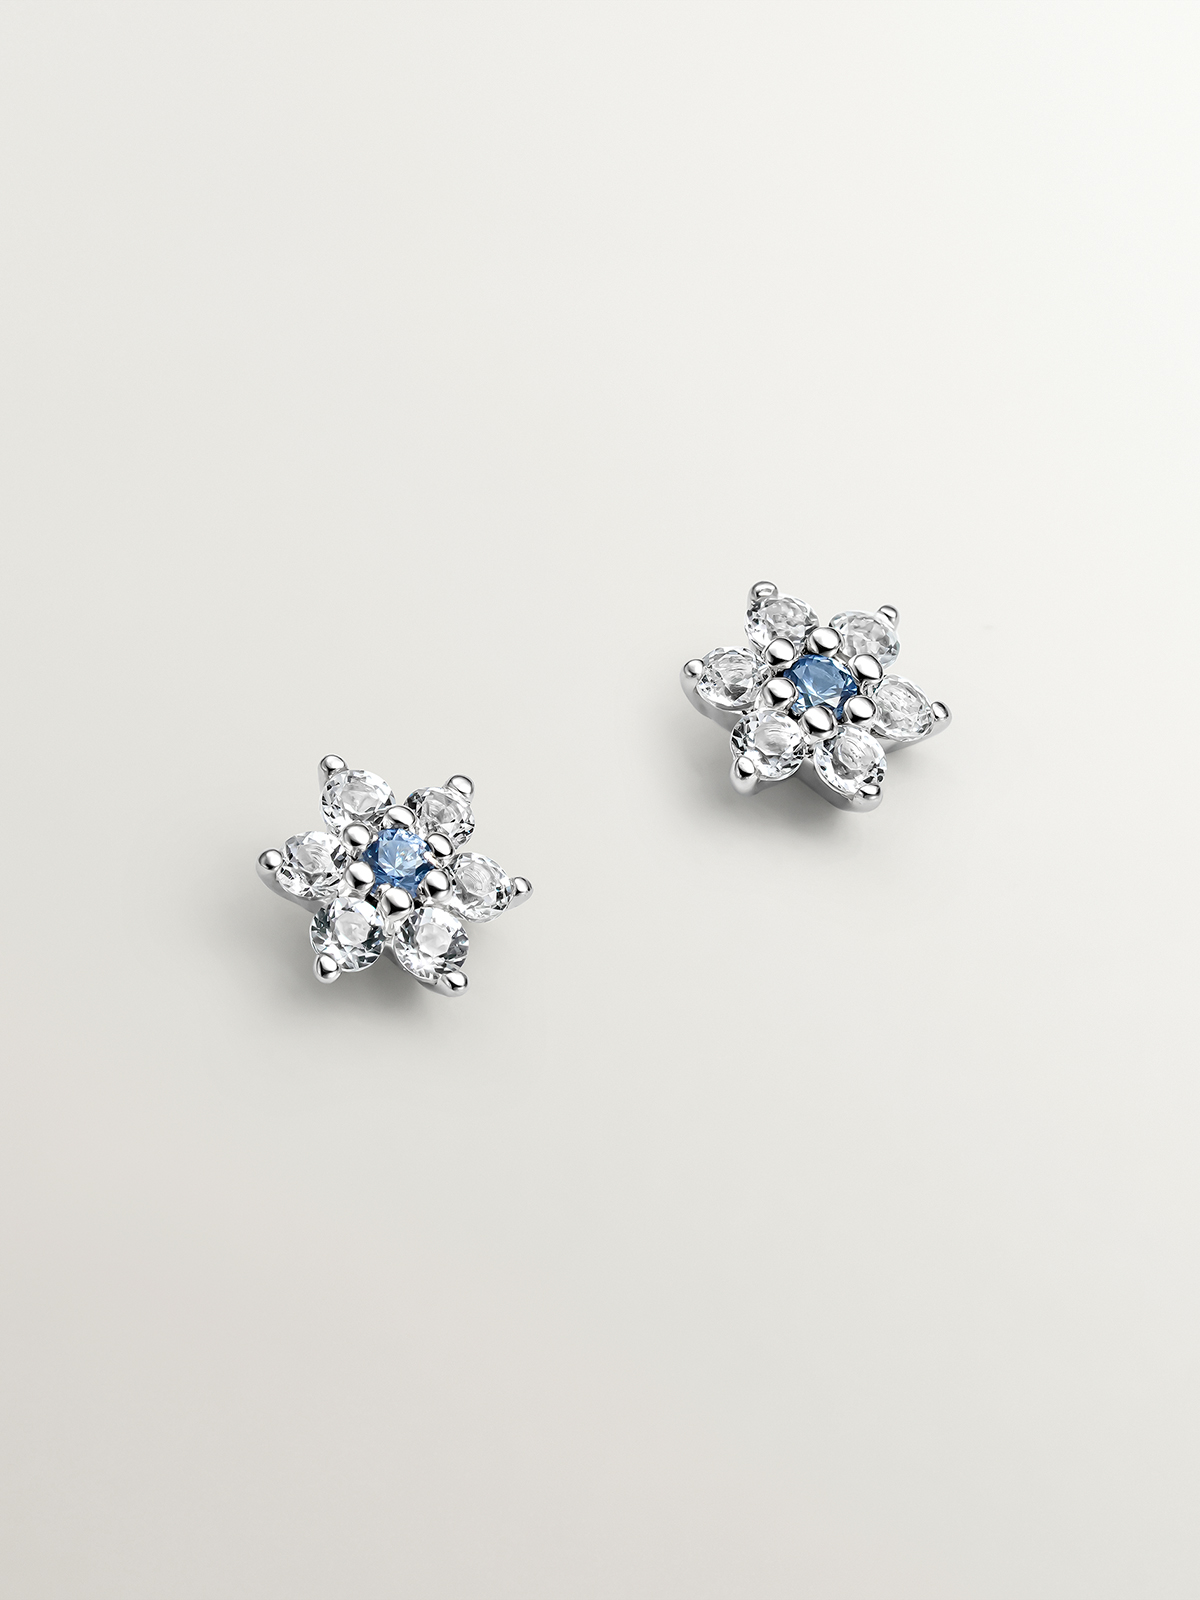 925 Silver earrings in the shape of a flower with sapphire and topaz.